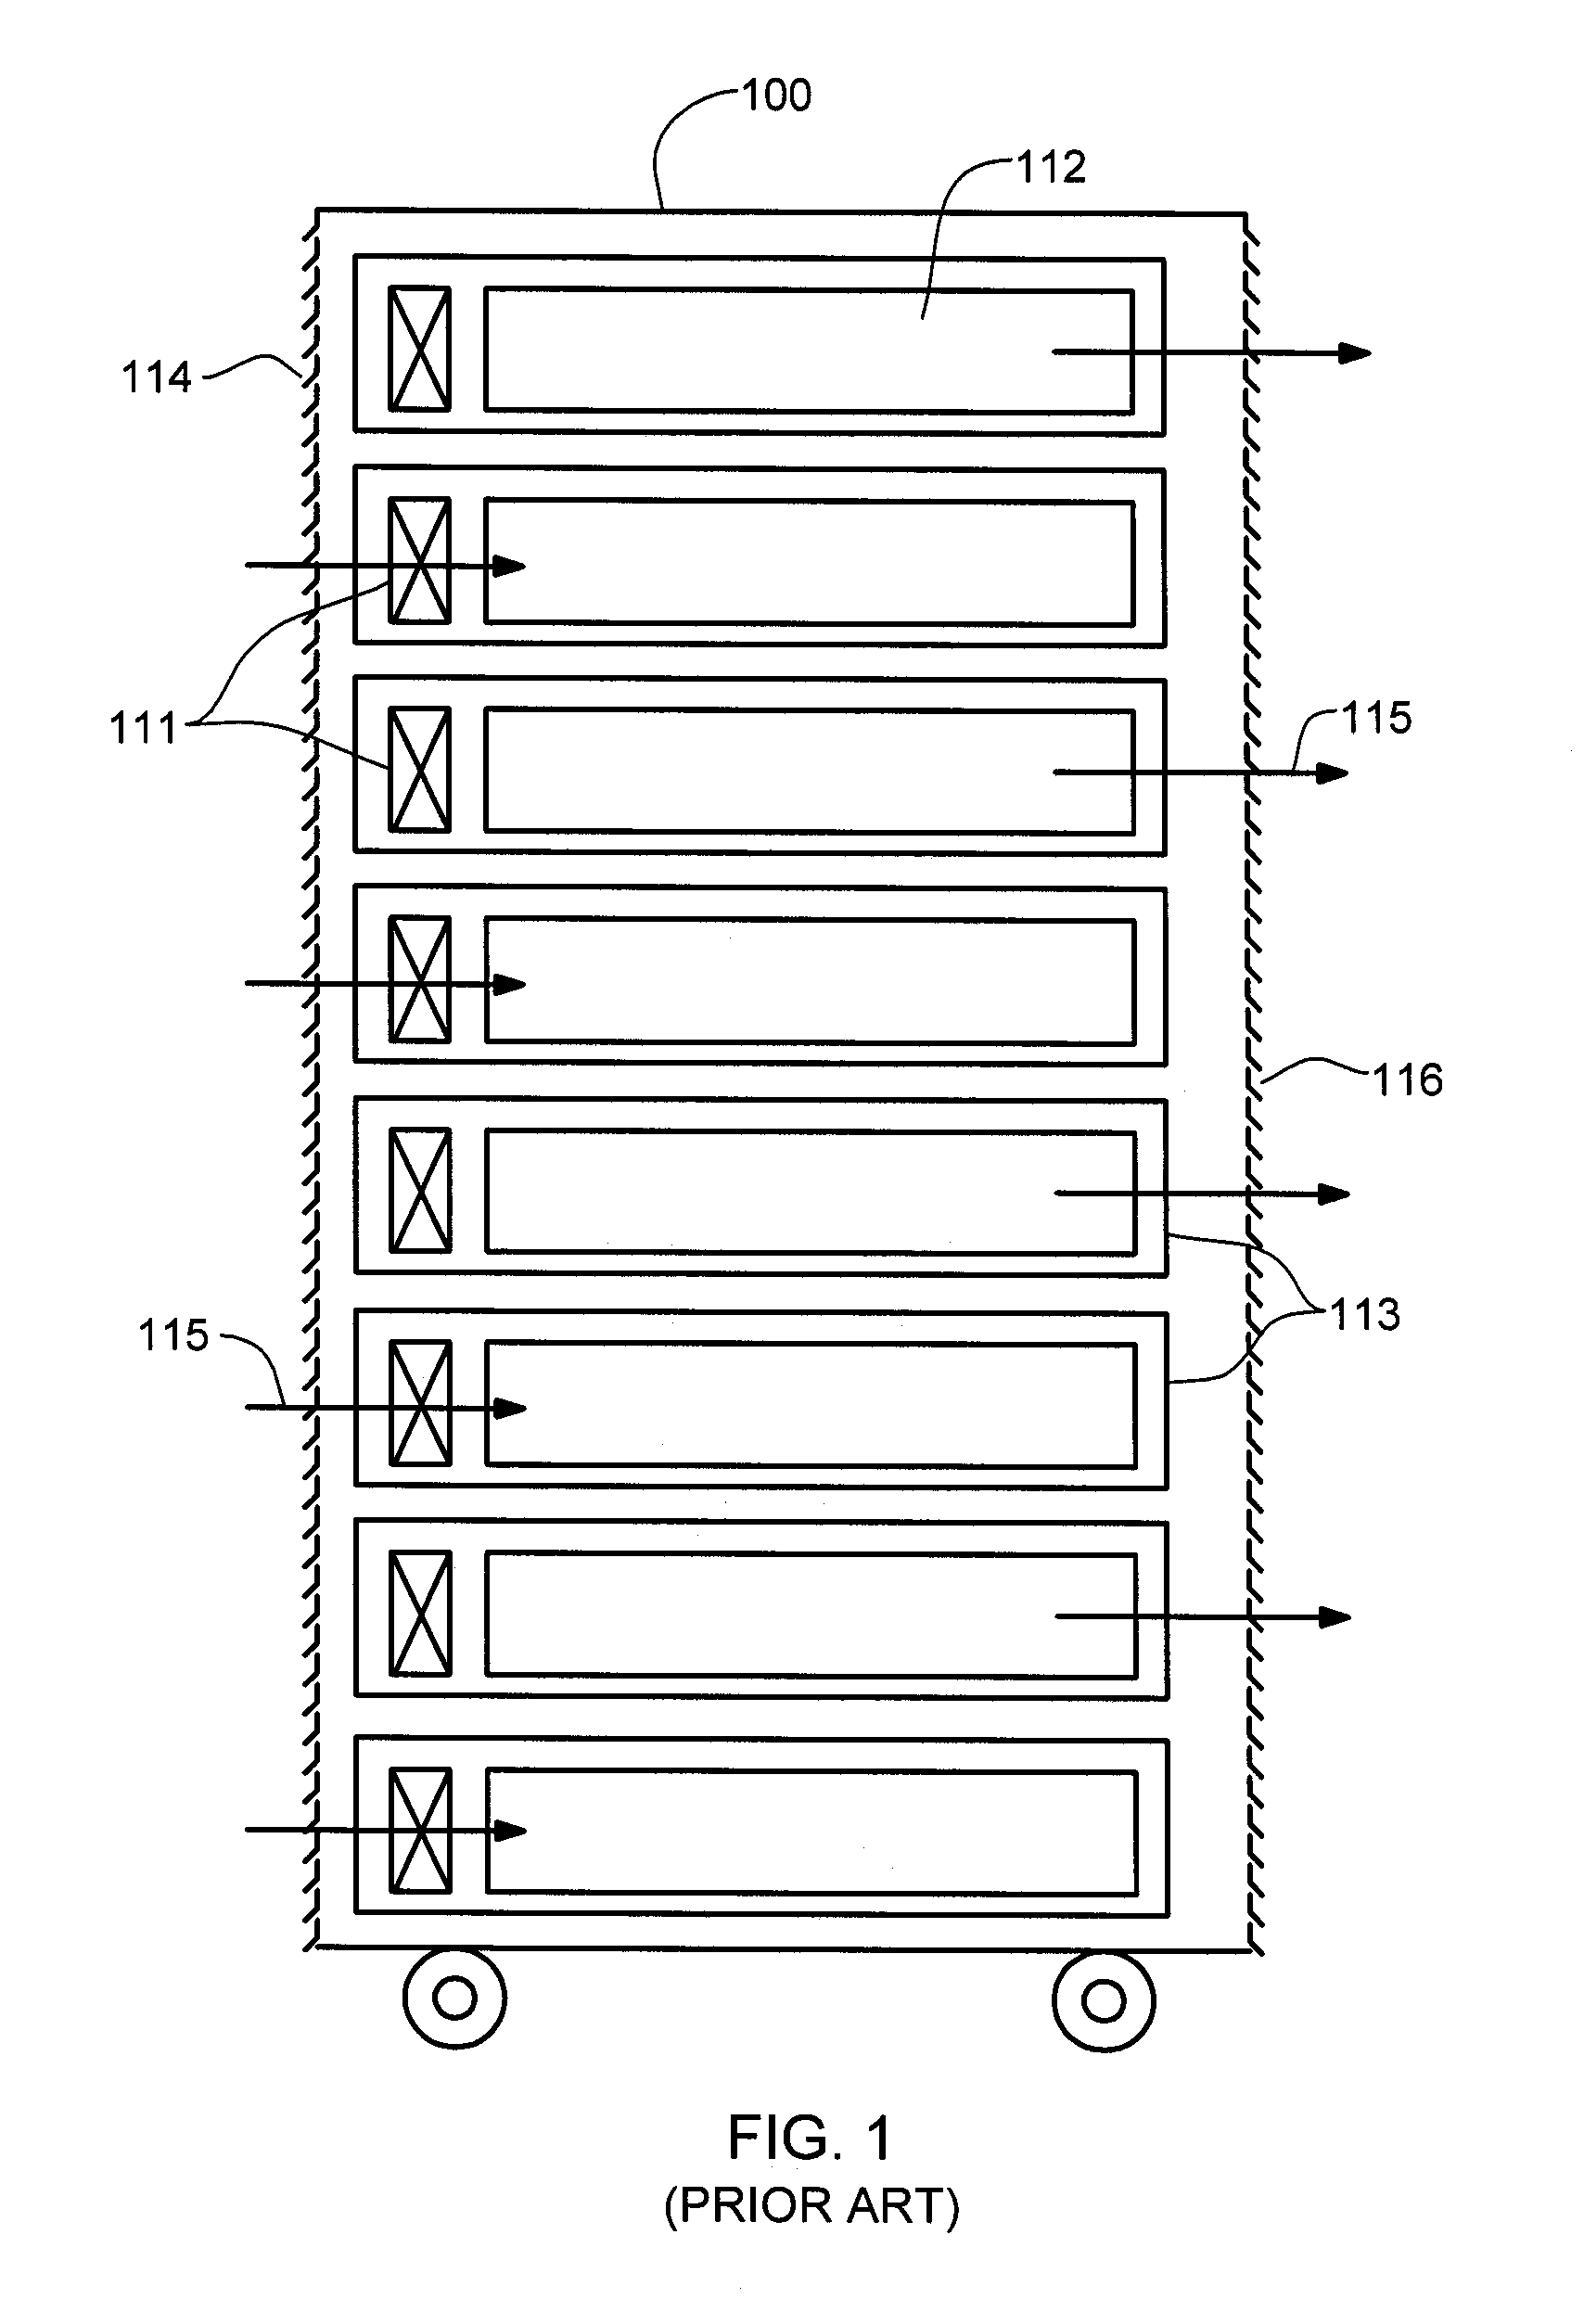 Method of assembling a cooling system for a multi-component electronics system